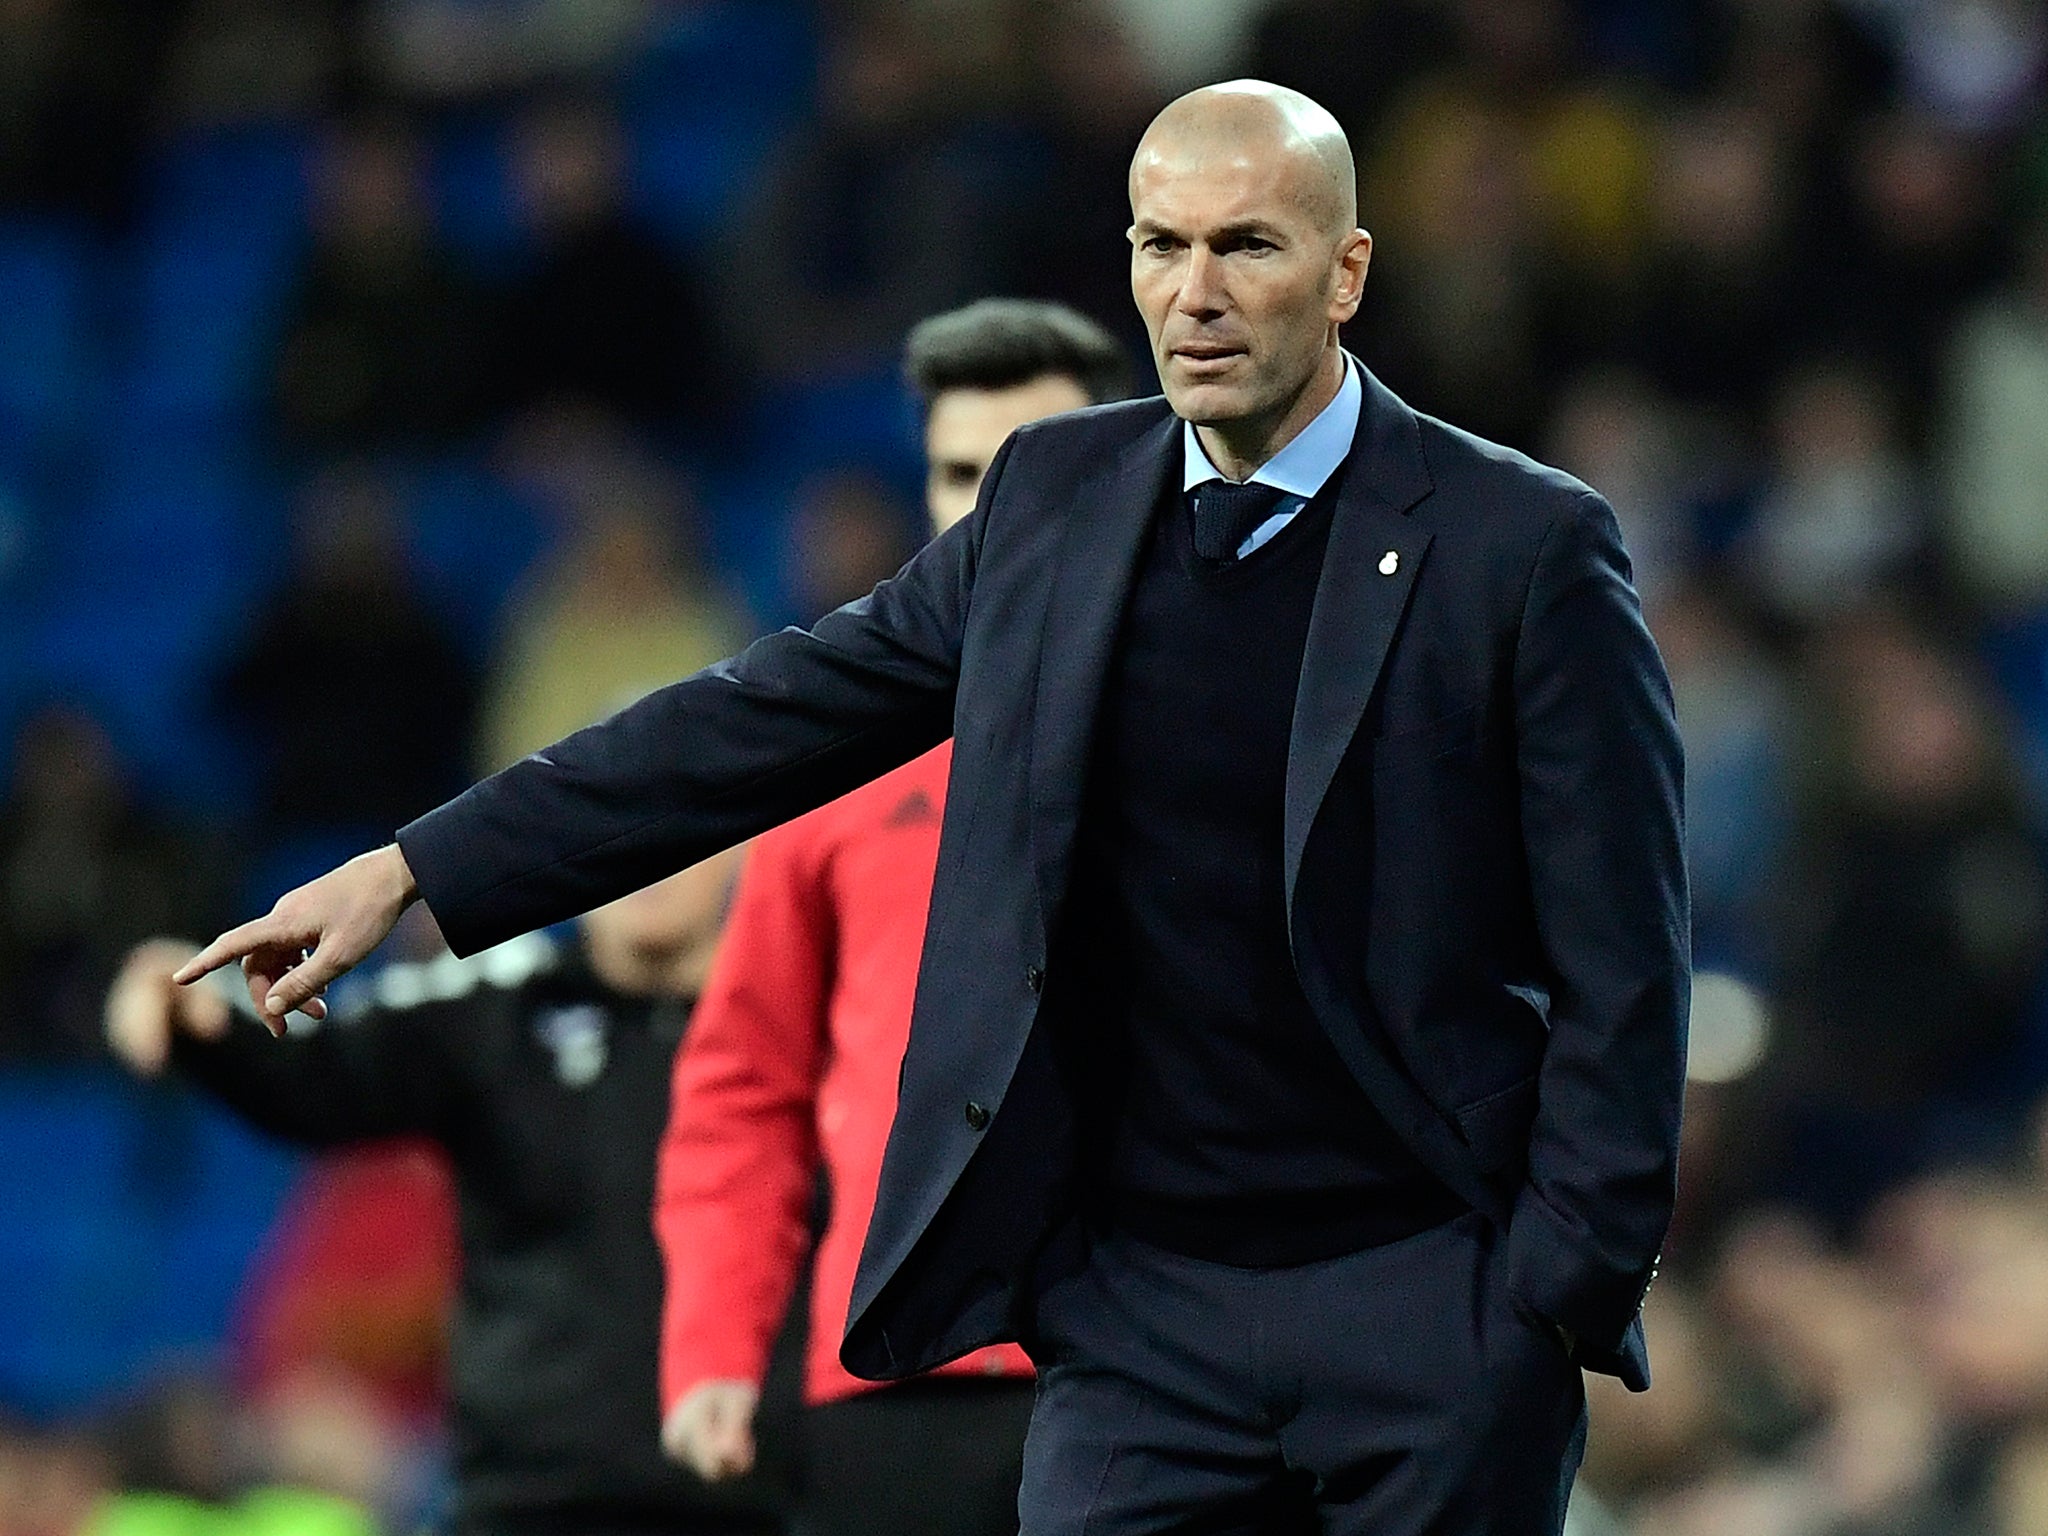 Zidane admitted that his job depends on the Champions League